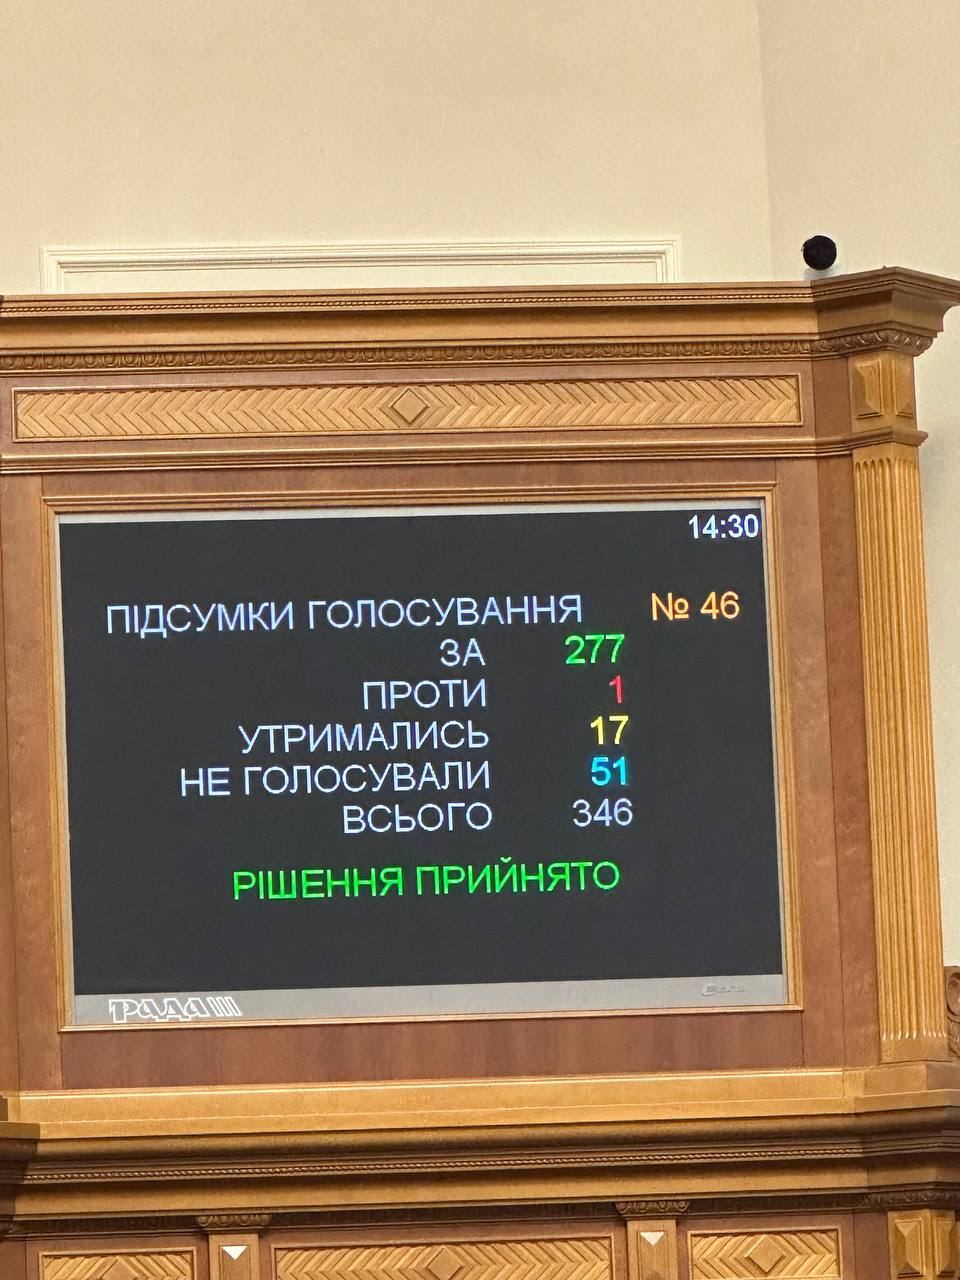 Military surcharges returned by MPs of the Verkhovna Rada